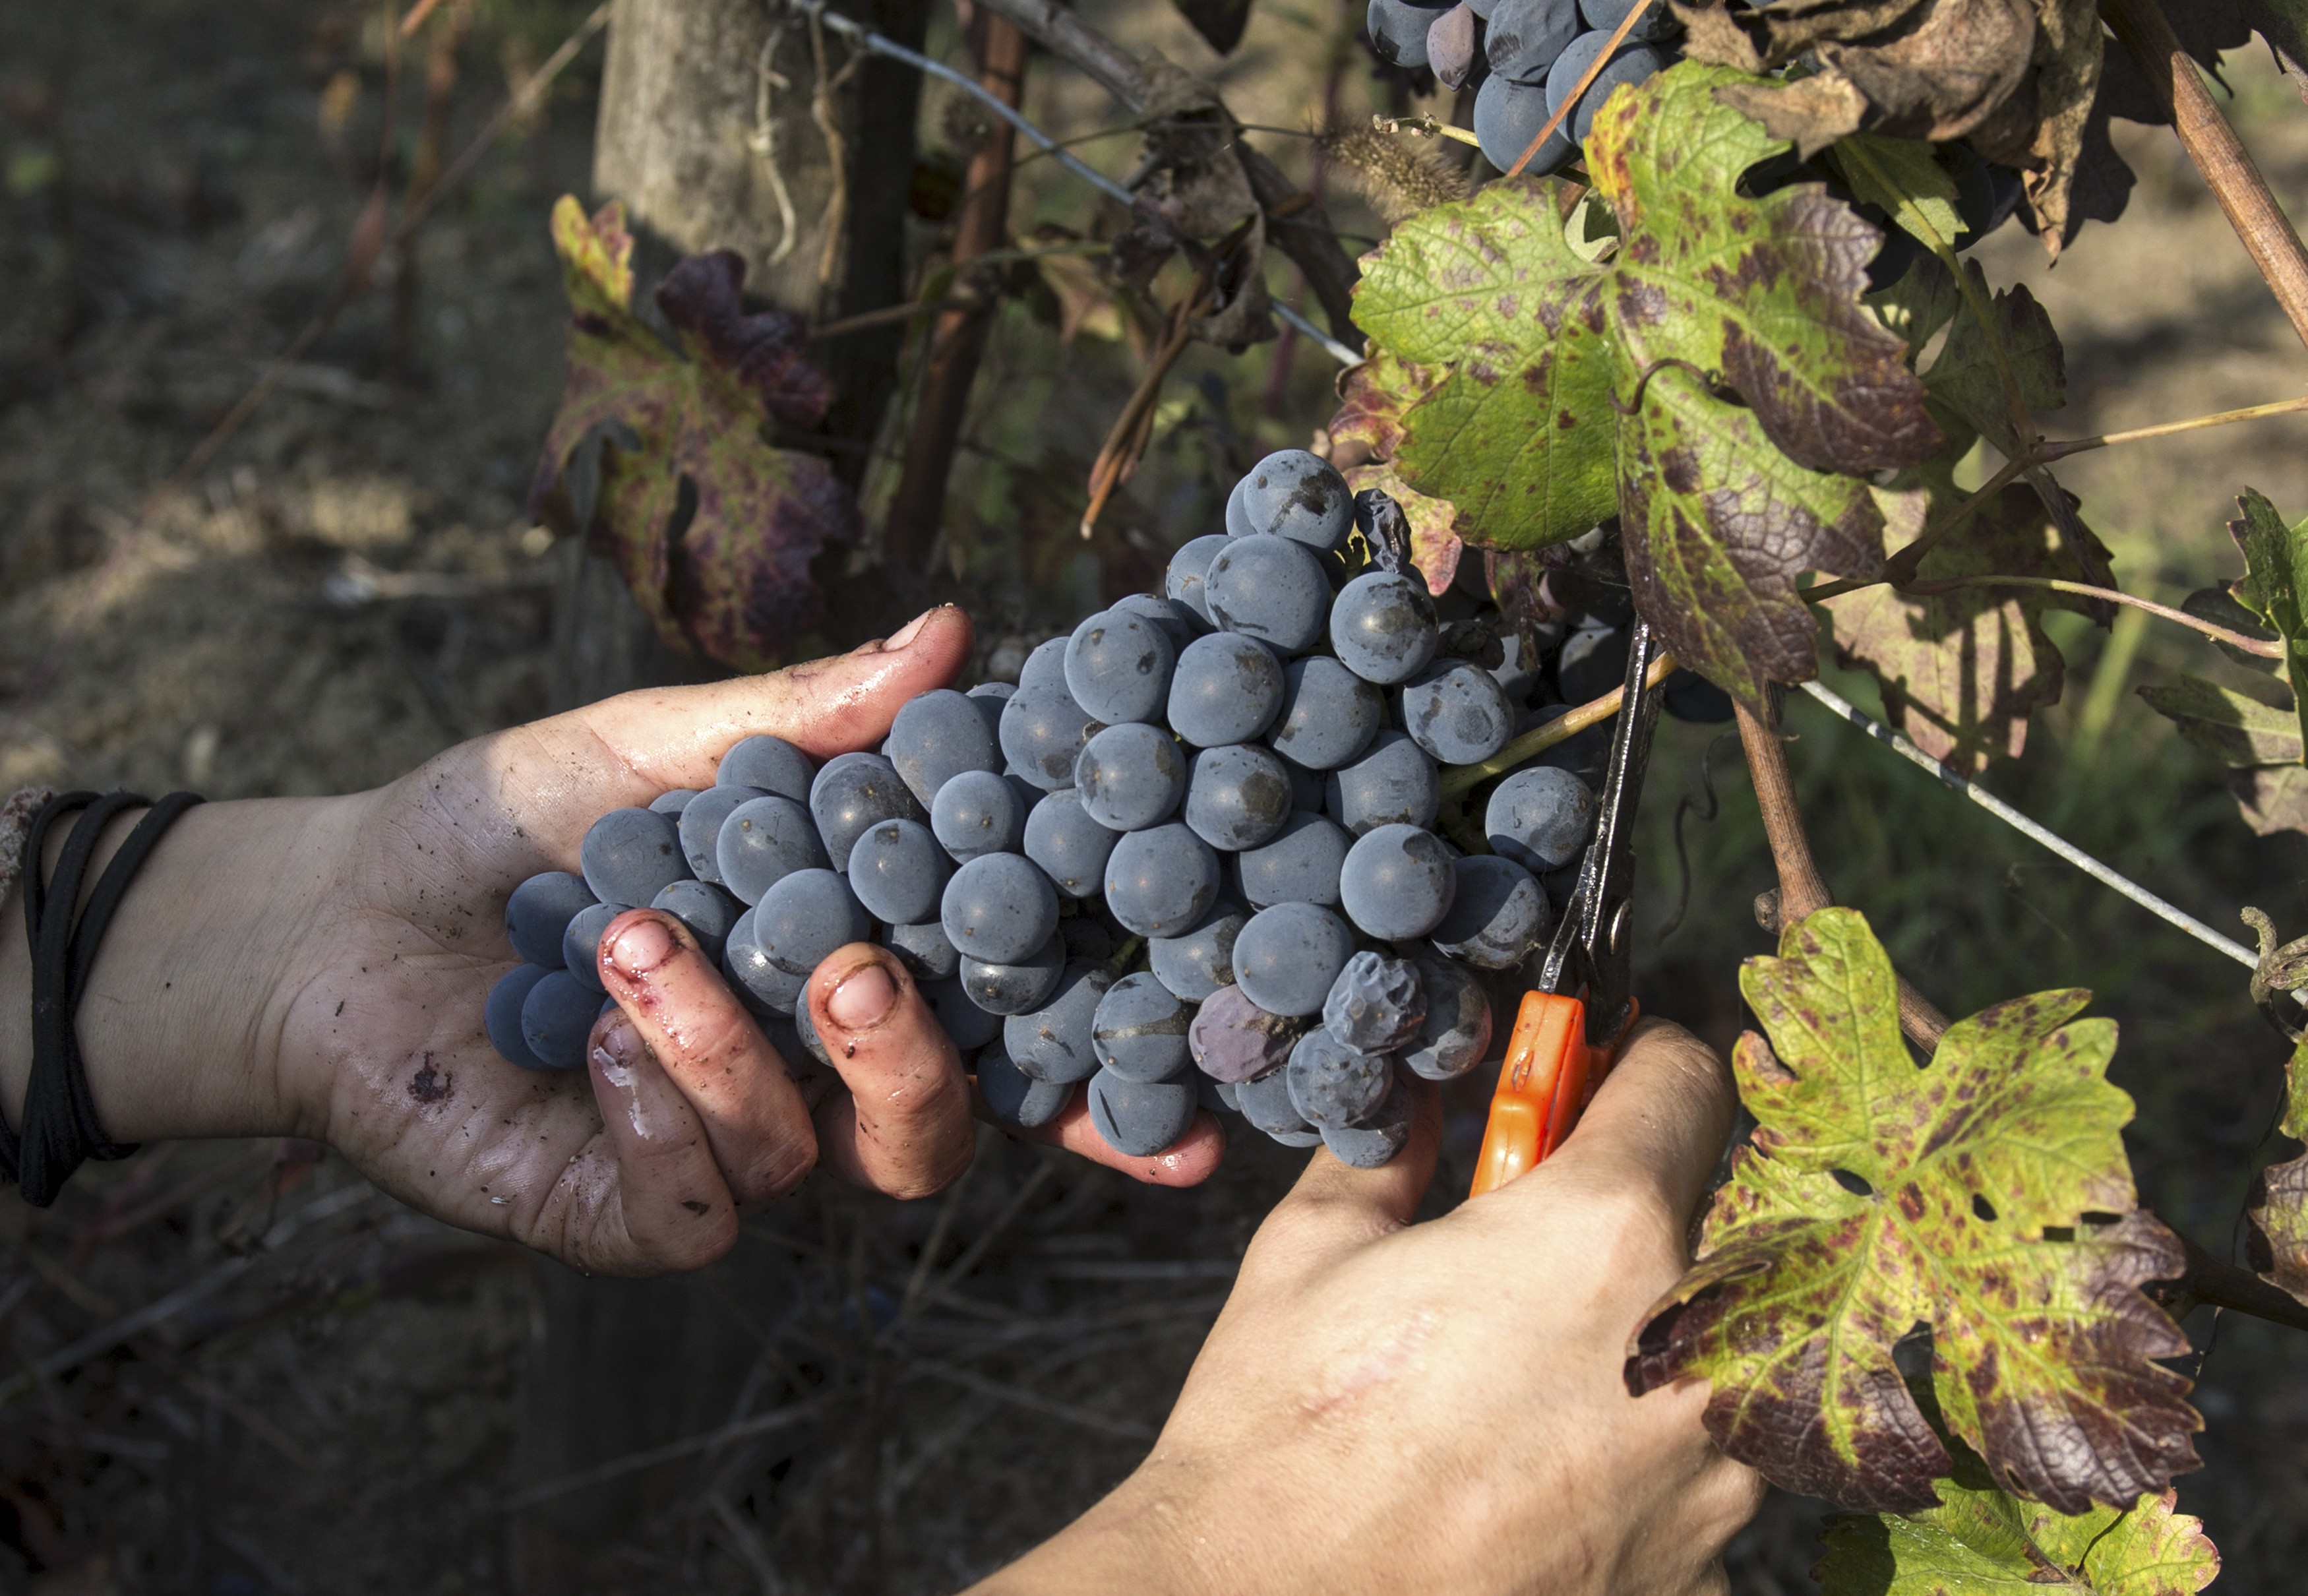 Rioja winemakers including Juan Carlos López de Lacalle produce wines bottled according to terroir- and site-specific character, so feel hampered by labelling grapes as from only one geographical designation. Photo: Shutterstock